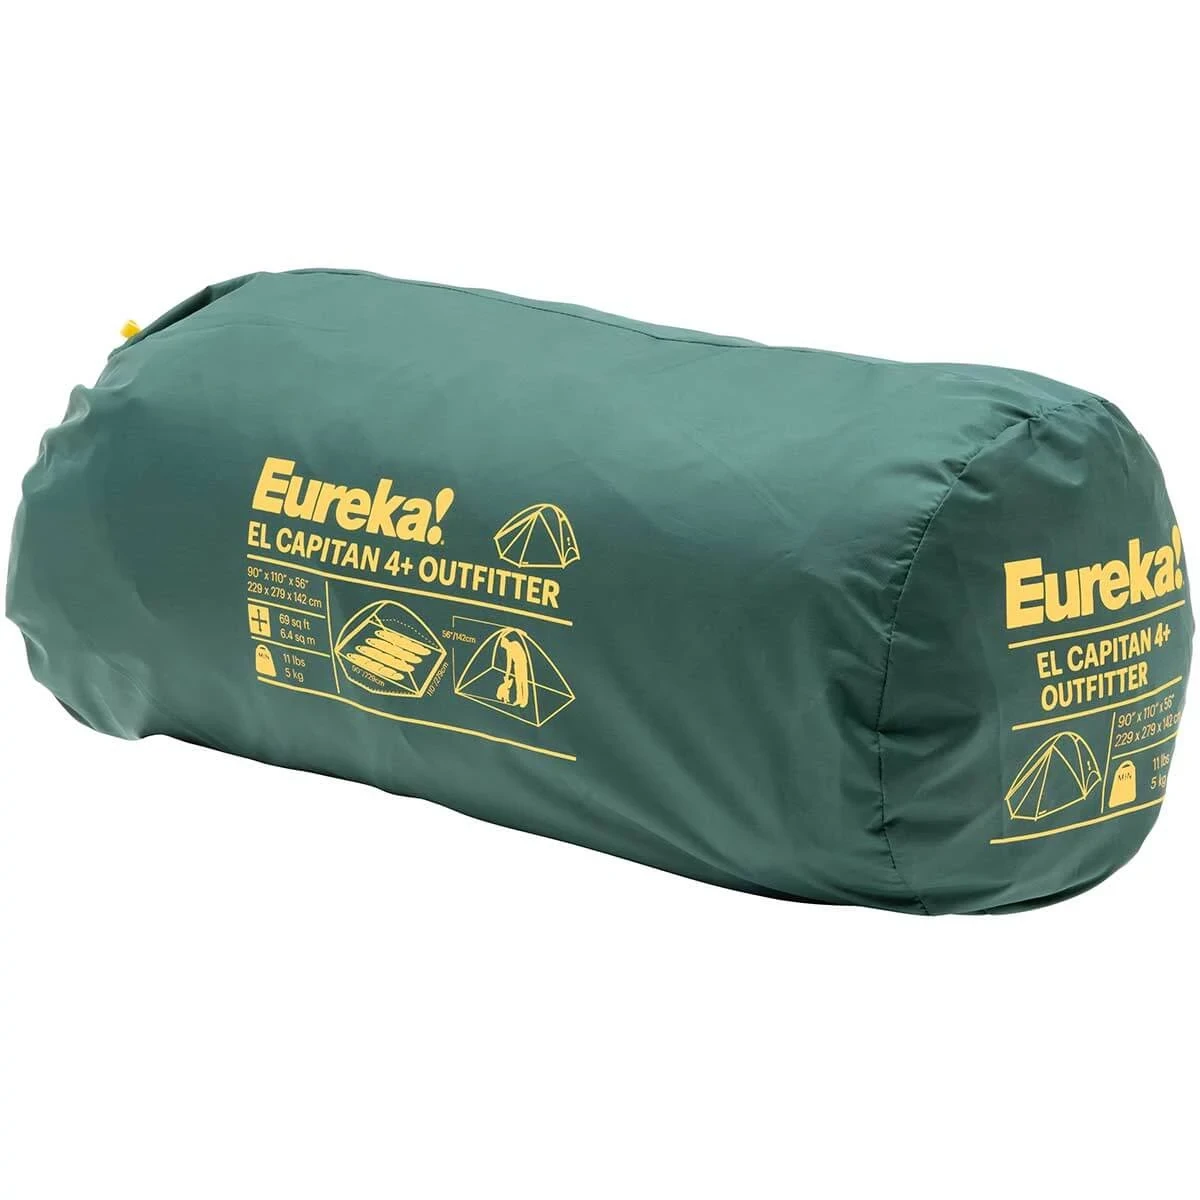 Packed Eureka! El Capitan 2+ Outfitter Tent in carry bag